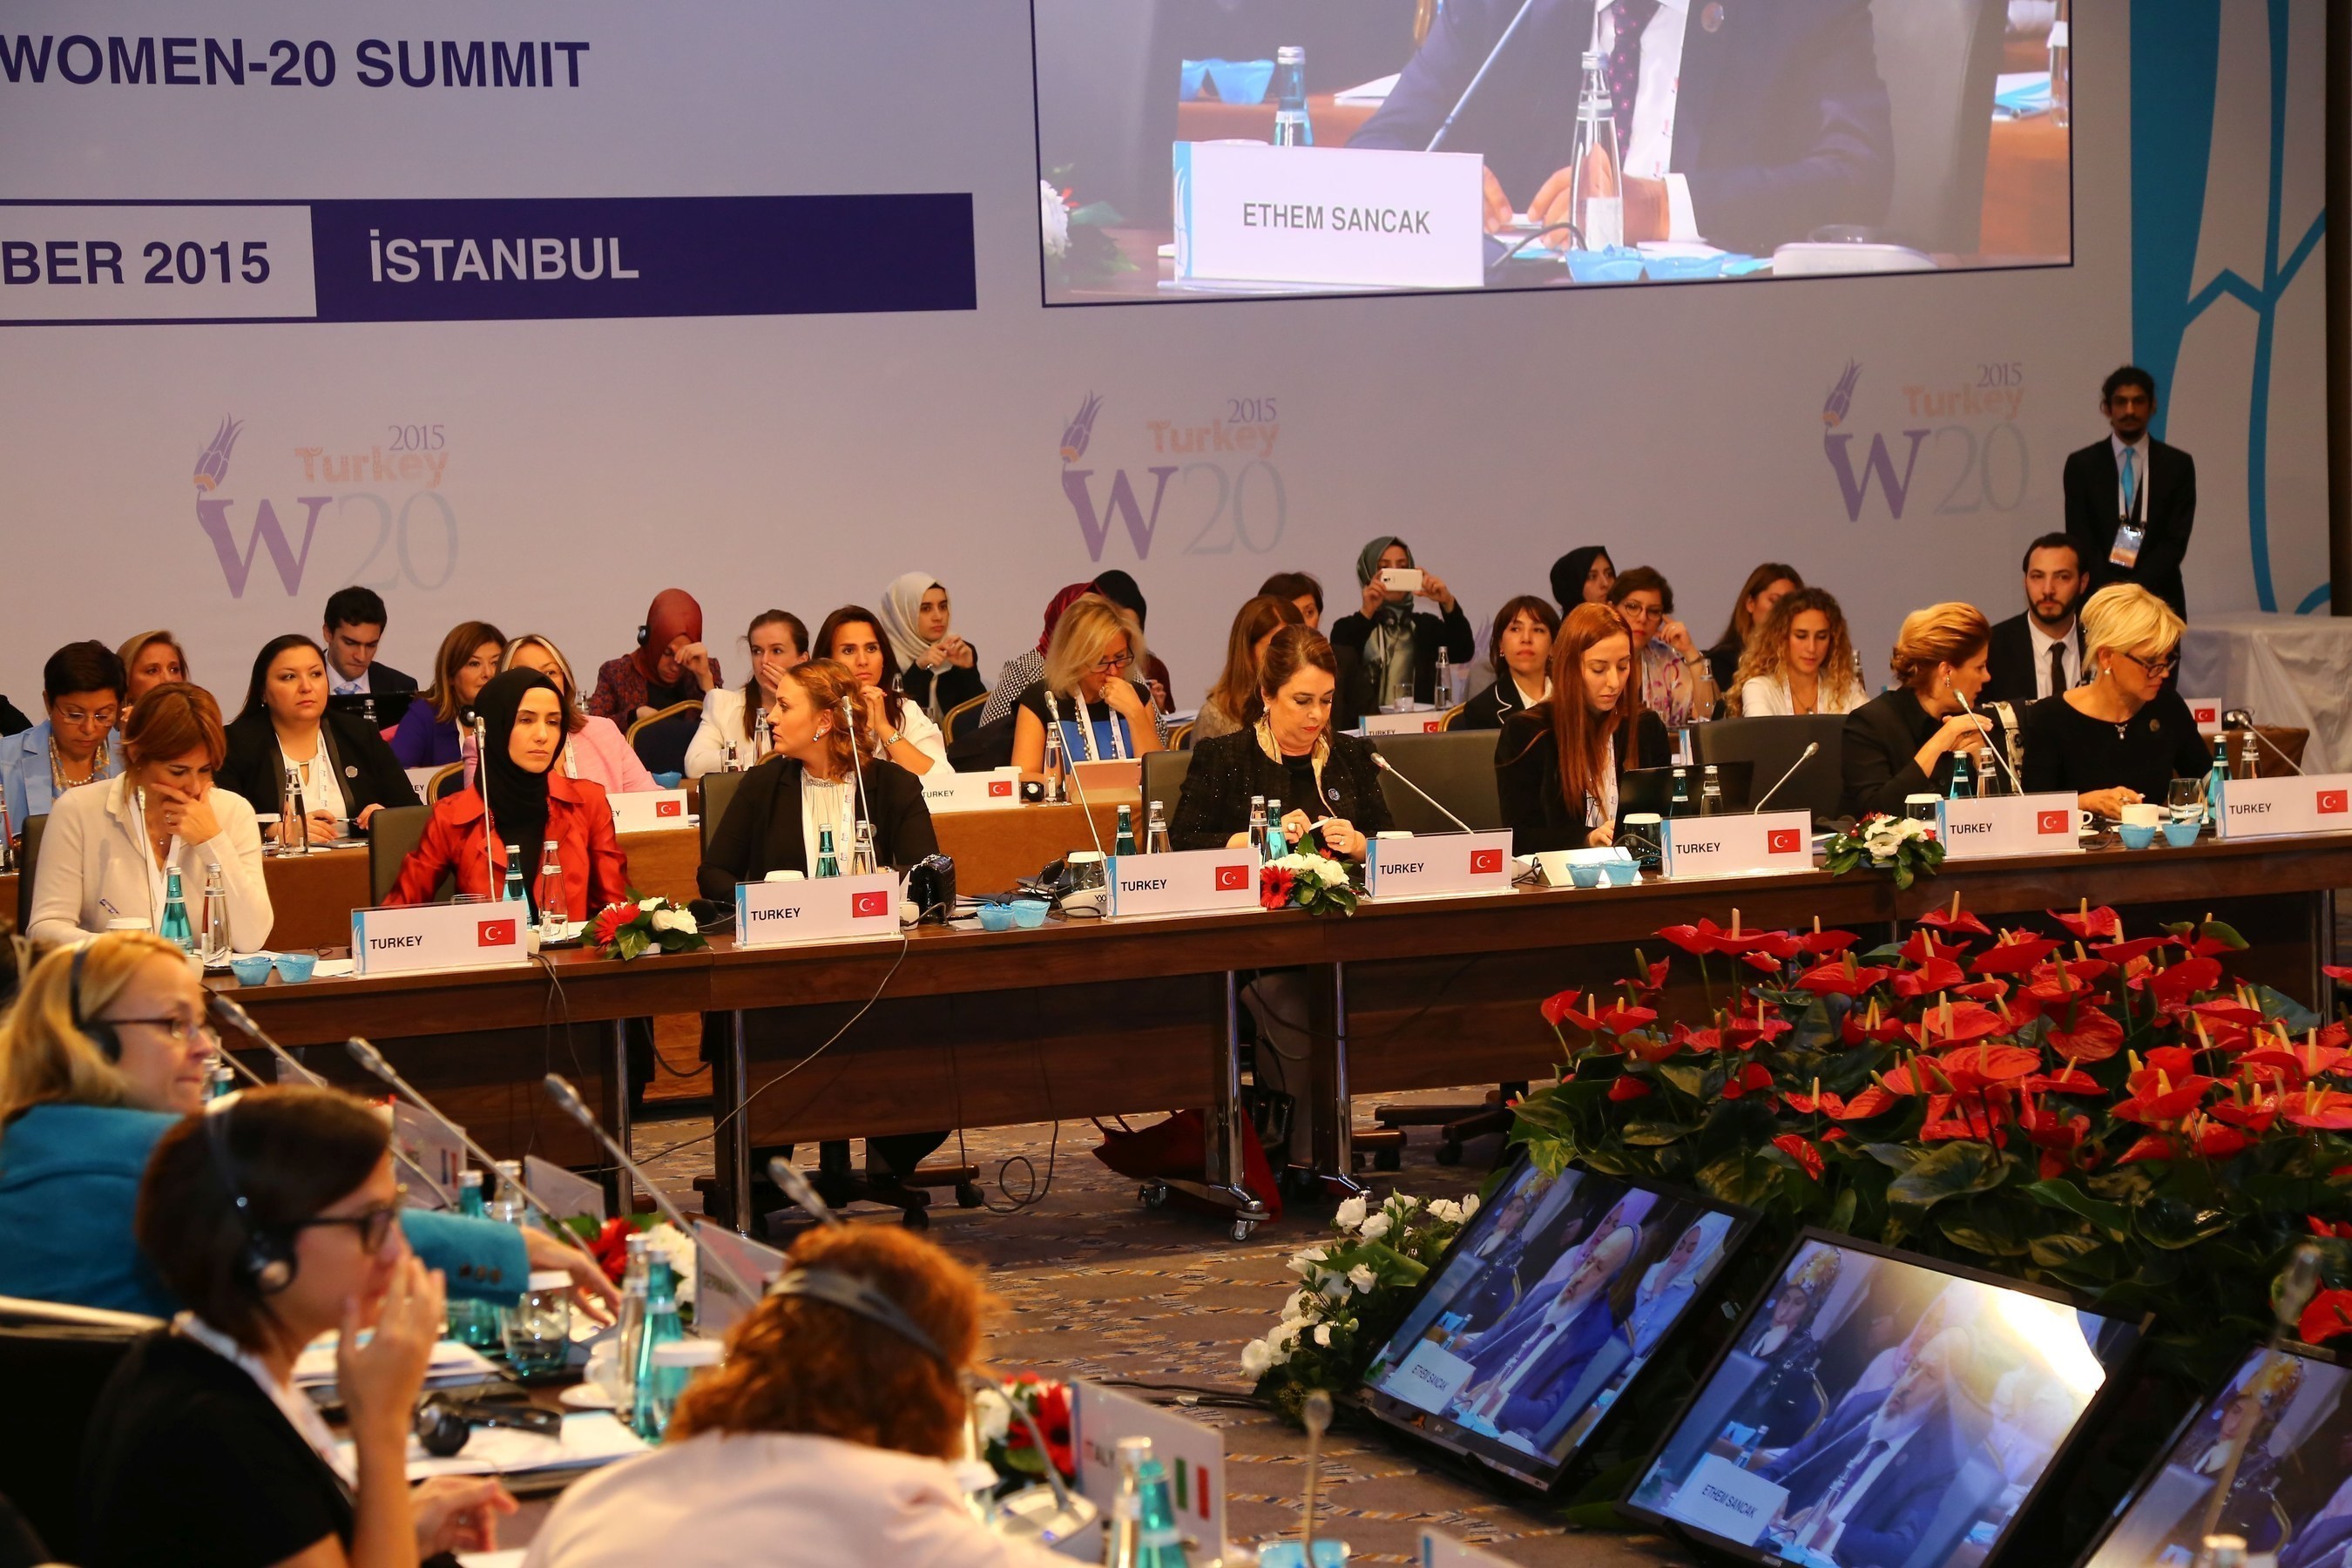 W20's mandate is to advance recent G20 commitments on: women's full economic and social participation (Los Cabos LeadersÃ¢â‚¬Å¸ Declaration, 2012); enhance women's financial inclusion and education (St Petersburg LeadersÃ¢â‚¬Å¸ Declaration, 2013); and reduce the gap in participation rates between men and women in our countries by 25 per cent by 2025 (Brisbane LeadersÃ¢â‚¬Å¸ Declaration, 2014). Additional areas of W20's focus identified include promoting women's entrepreneurship, women's leadership in business and the public sector, and healthcare. (PRNewsFoto/G20 Turkish Presidency) (PRNewsFoto/G20 Turkish Presidency)